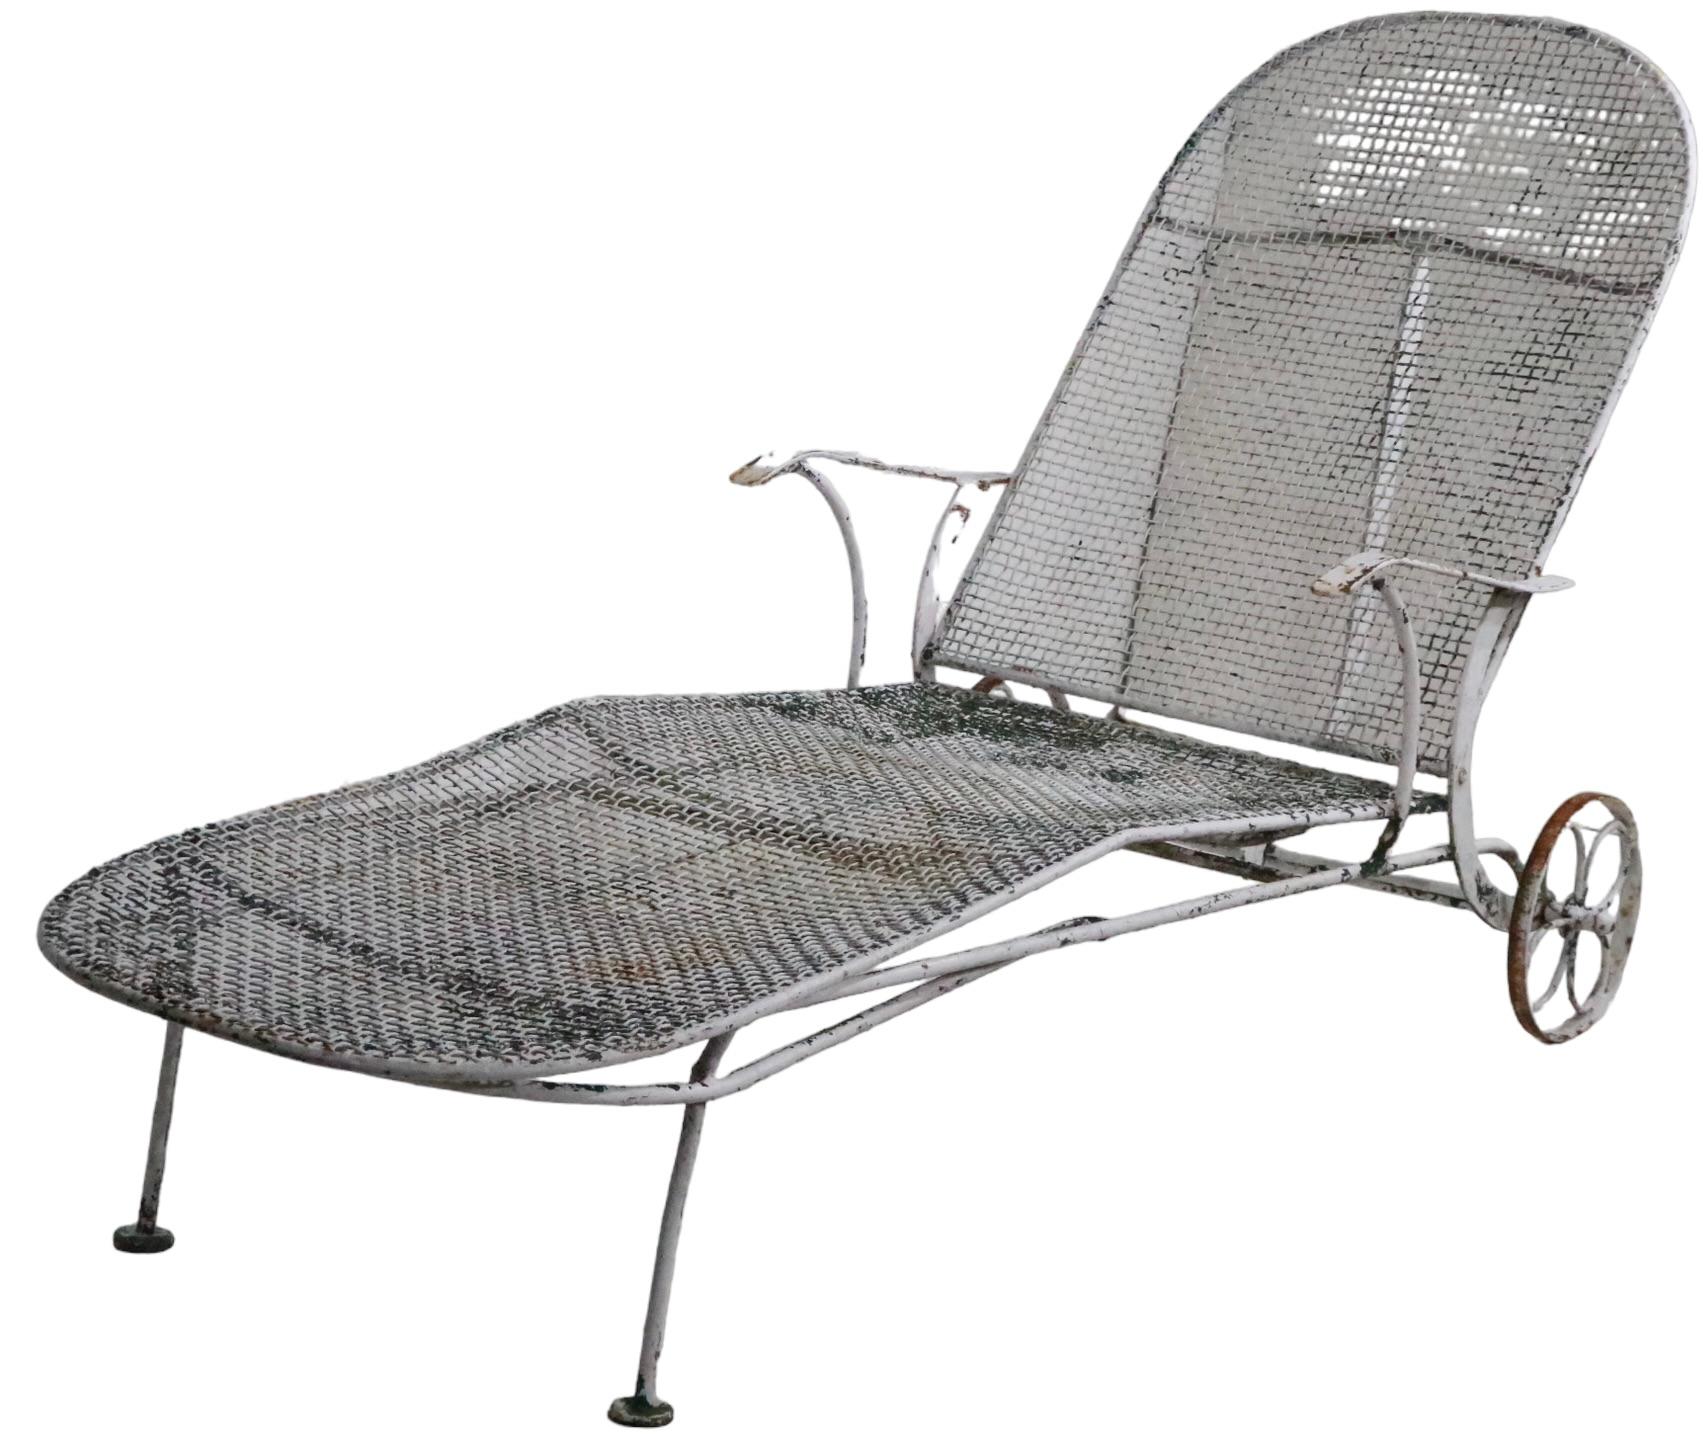  Wrought Iron Garden Poolside Patio Woodard Sculptura Chaise Lounge c. 1950's For Sale 2